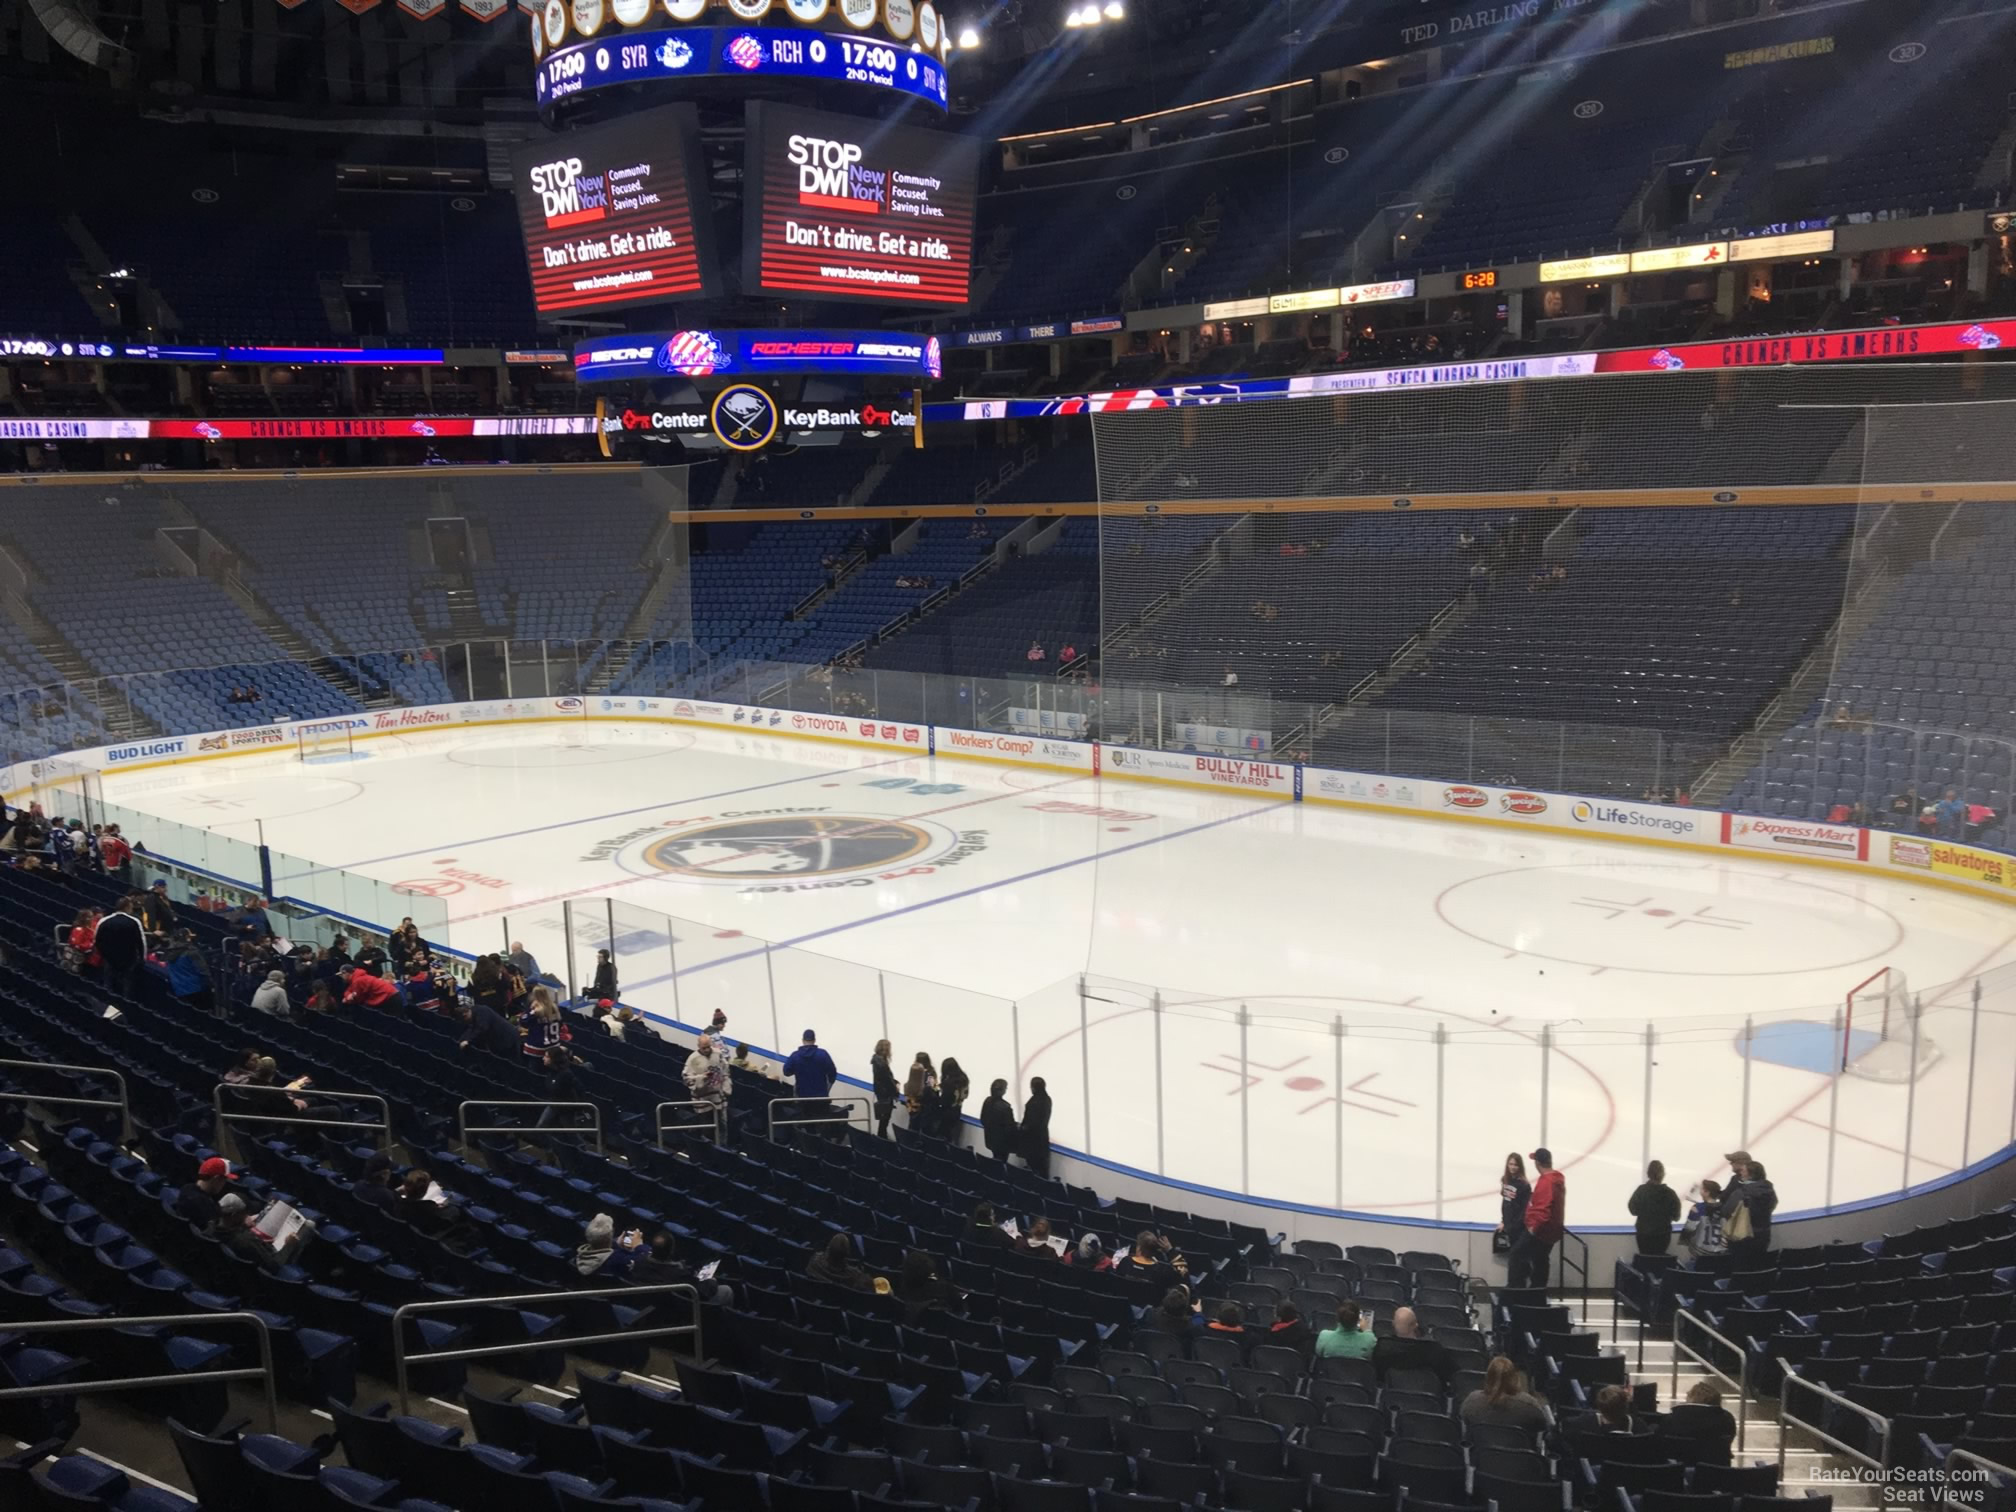 Section 203 at KeyBank Center - RateYourSeats.com